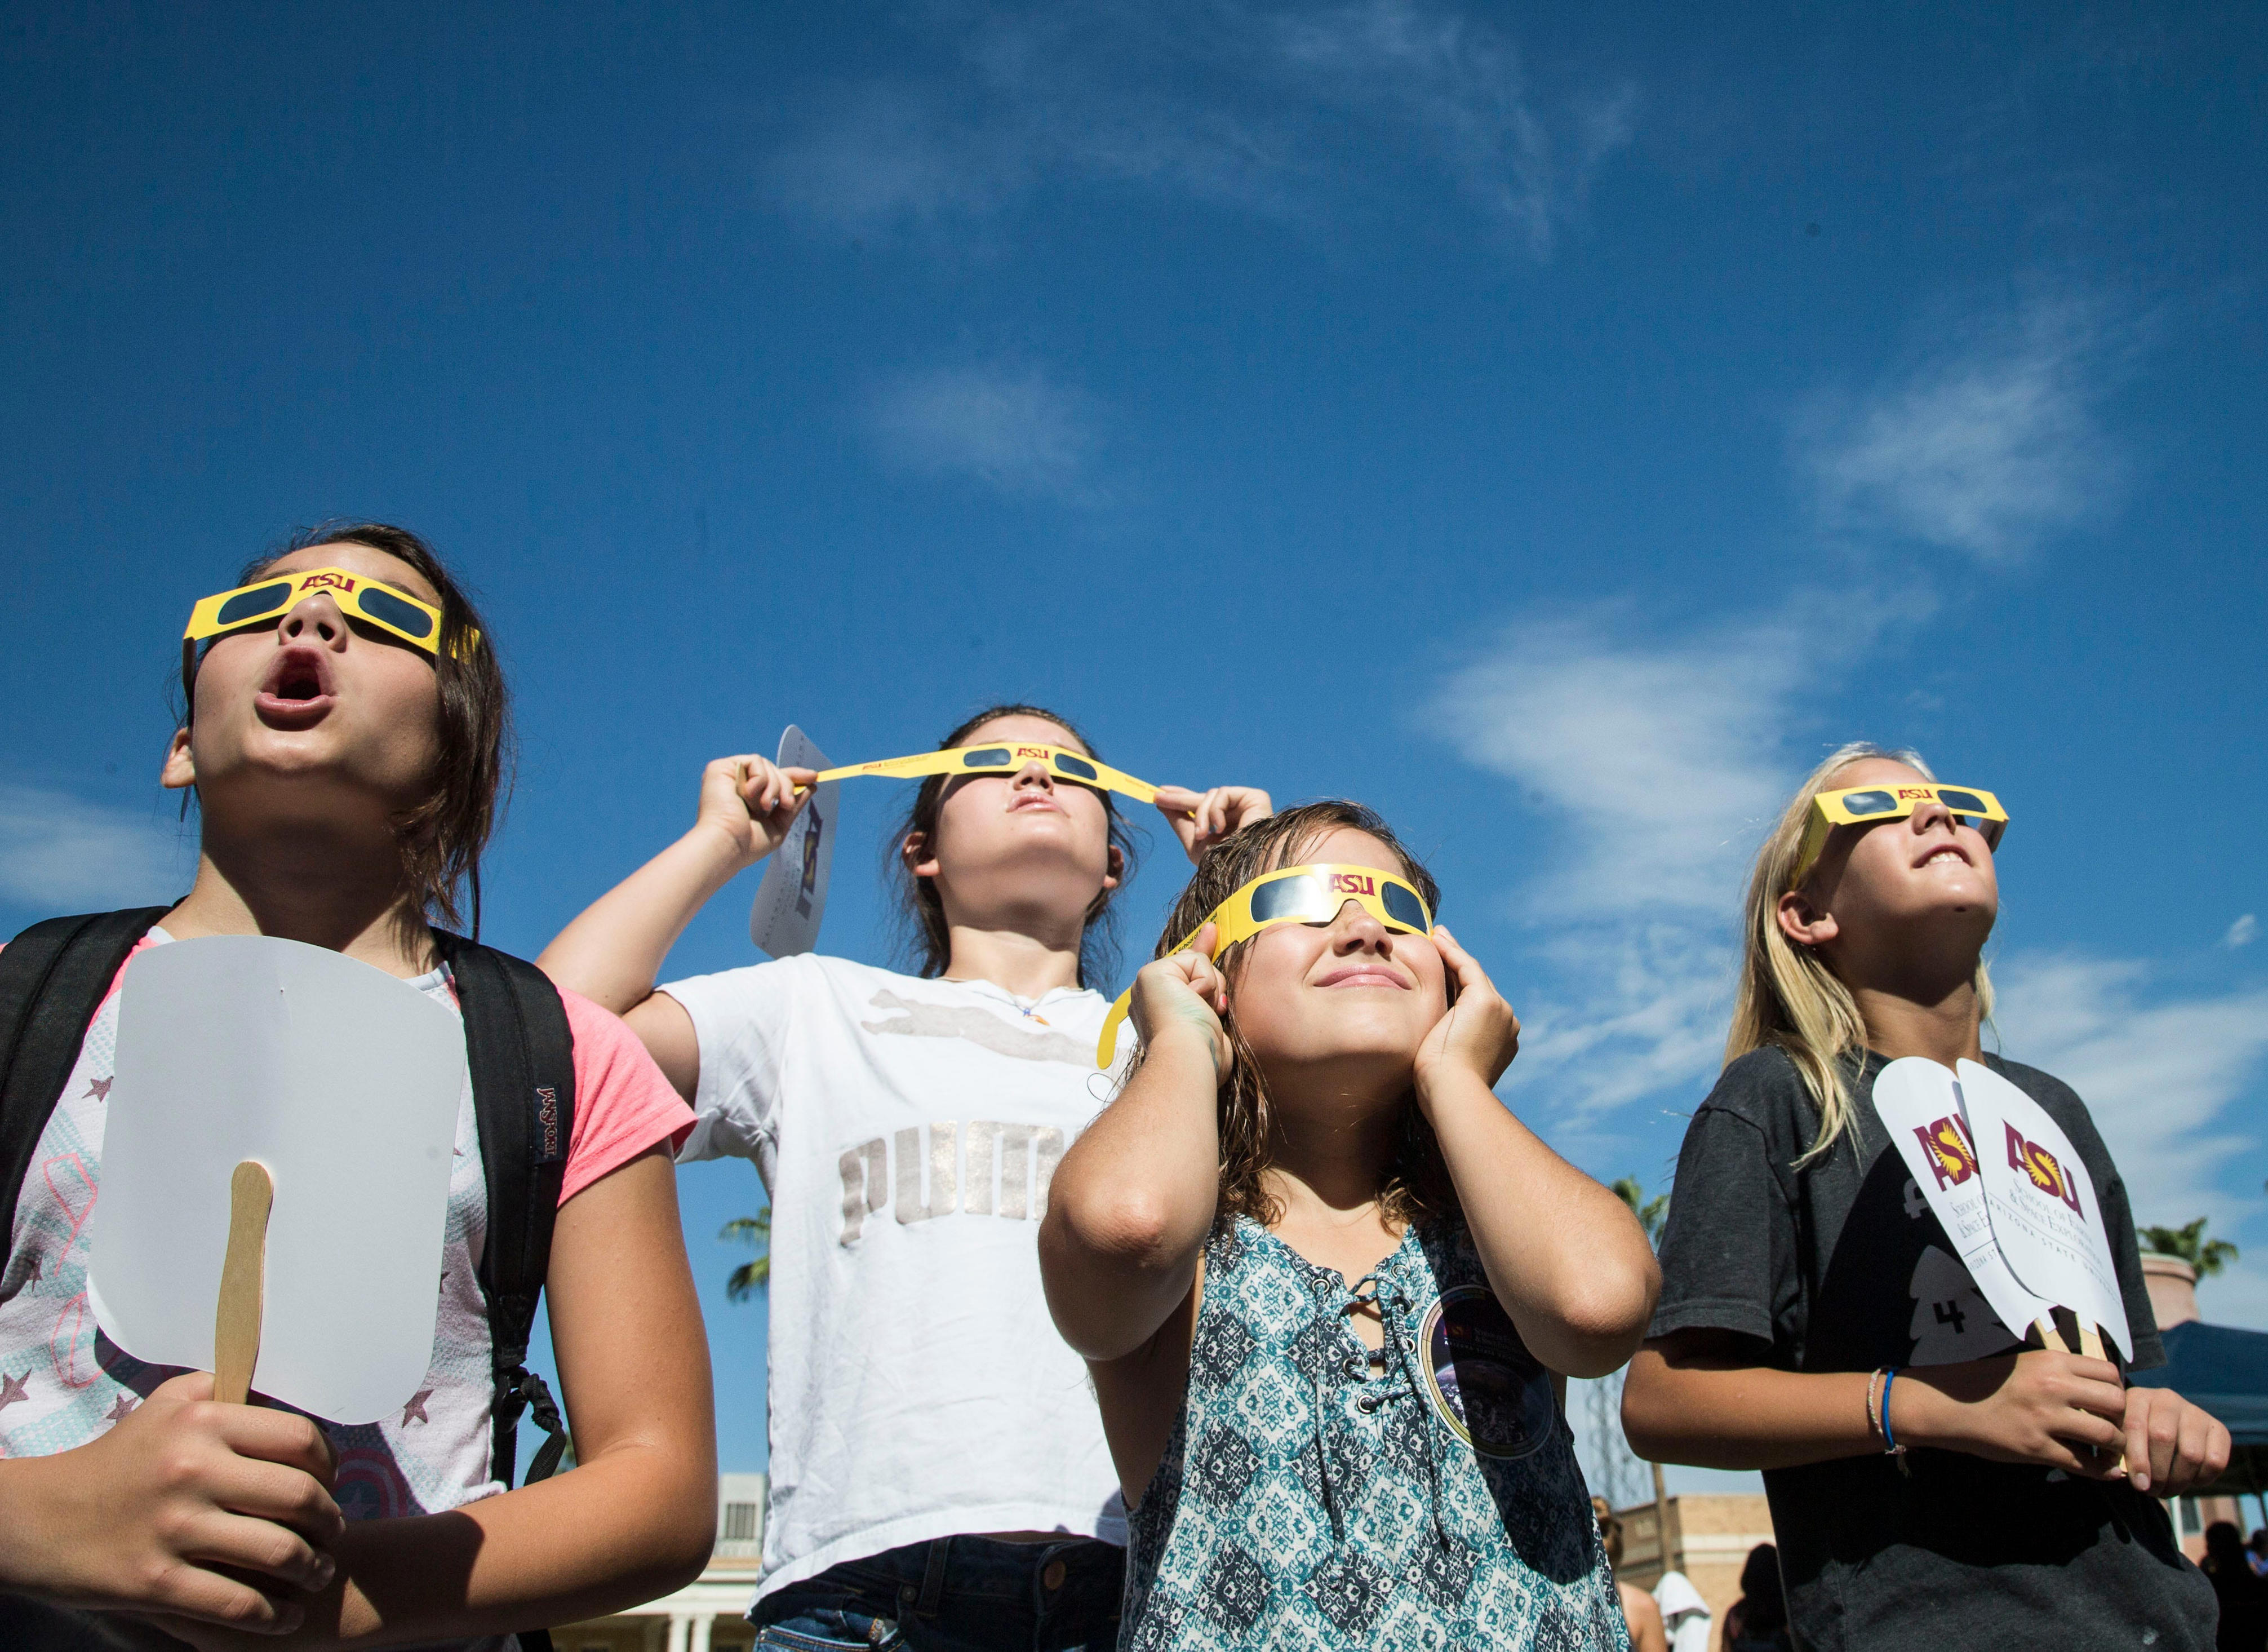 solar eclipse warnings pile up: watch out for danger in the sky, on the ground on april 8